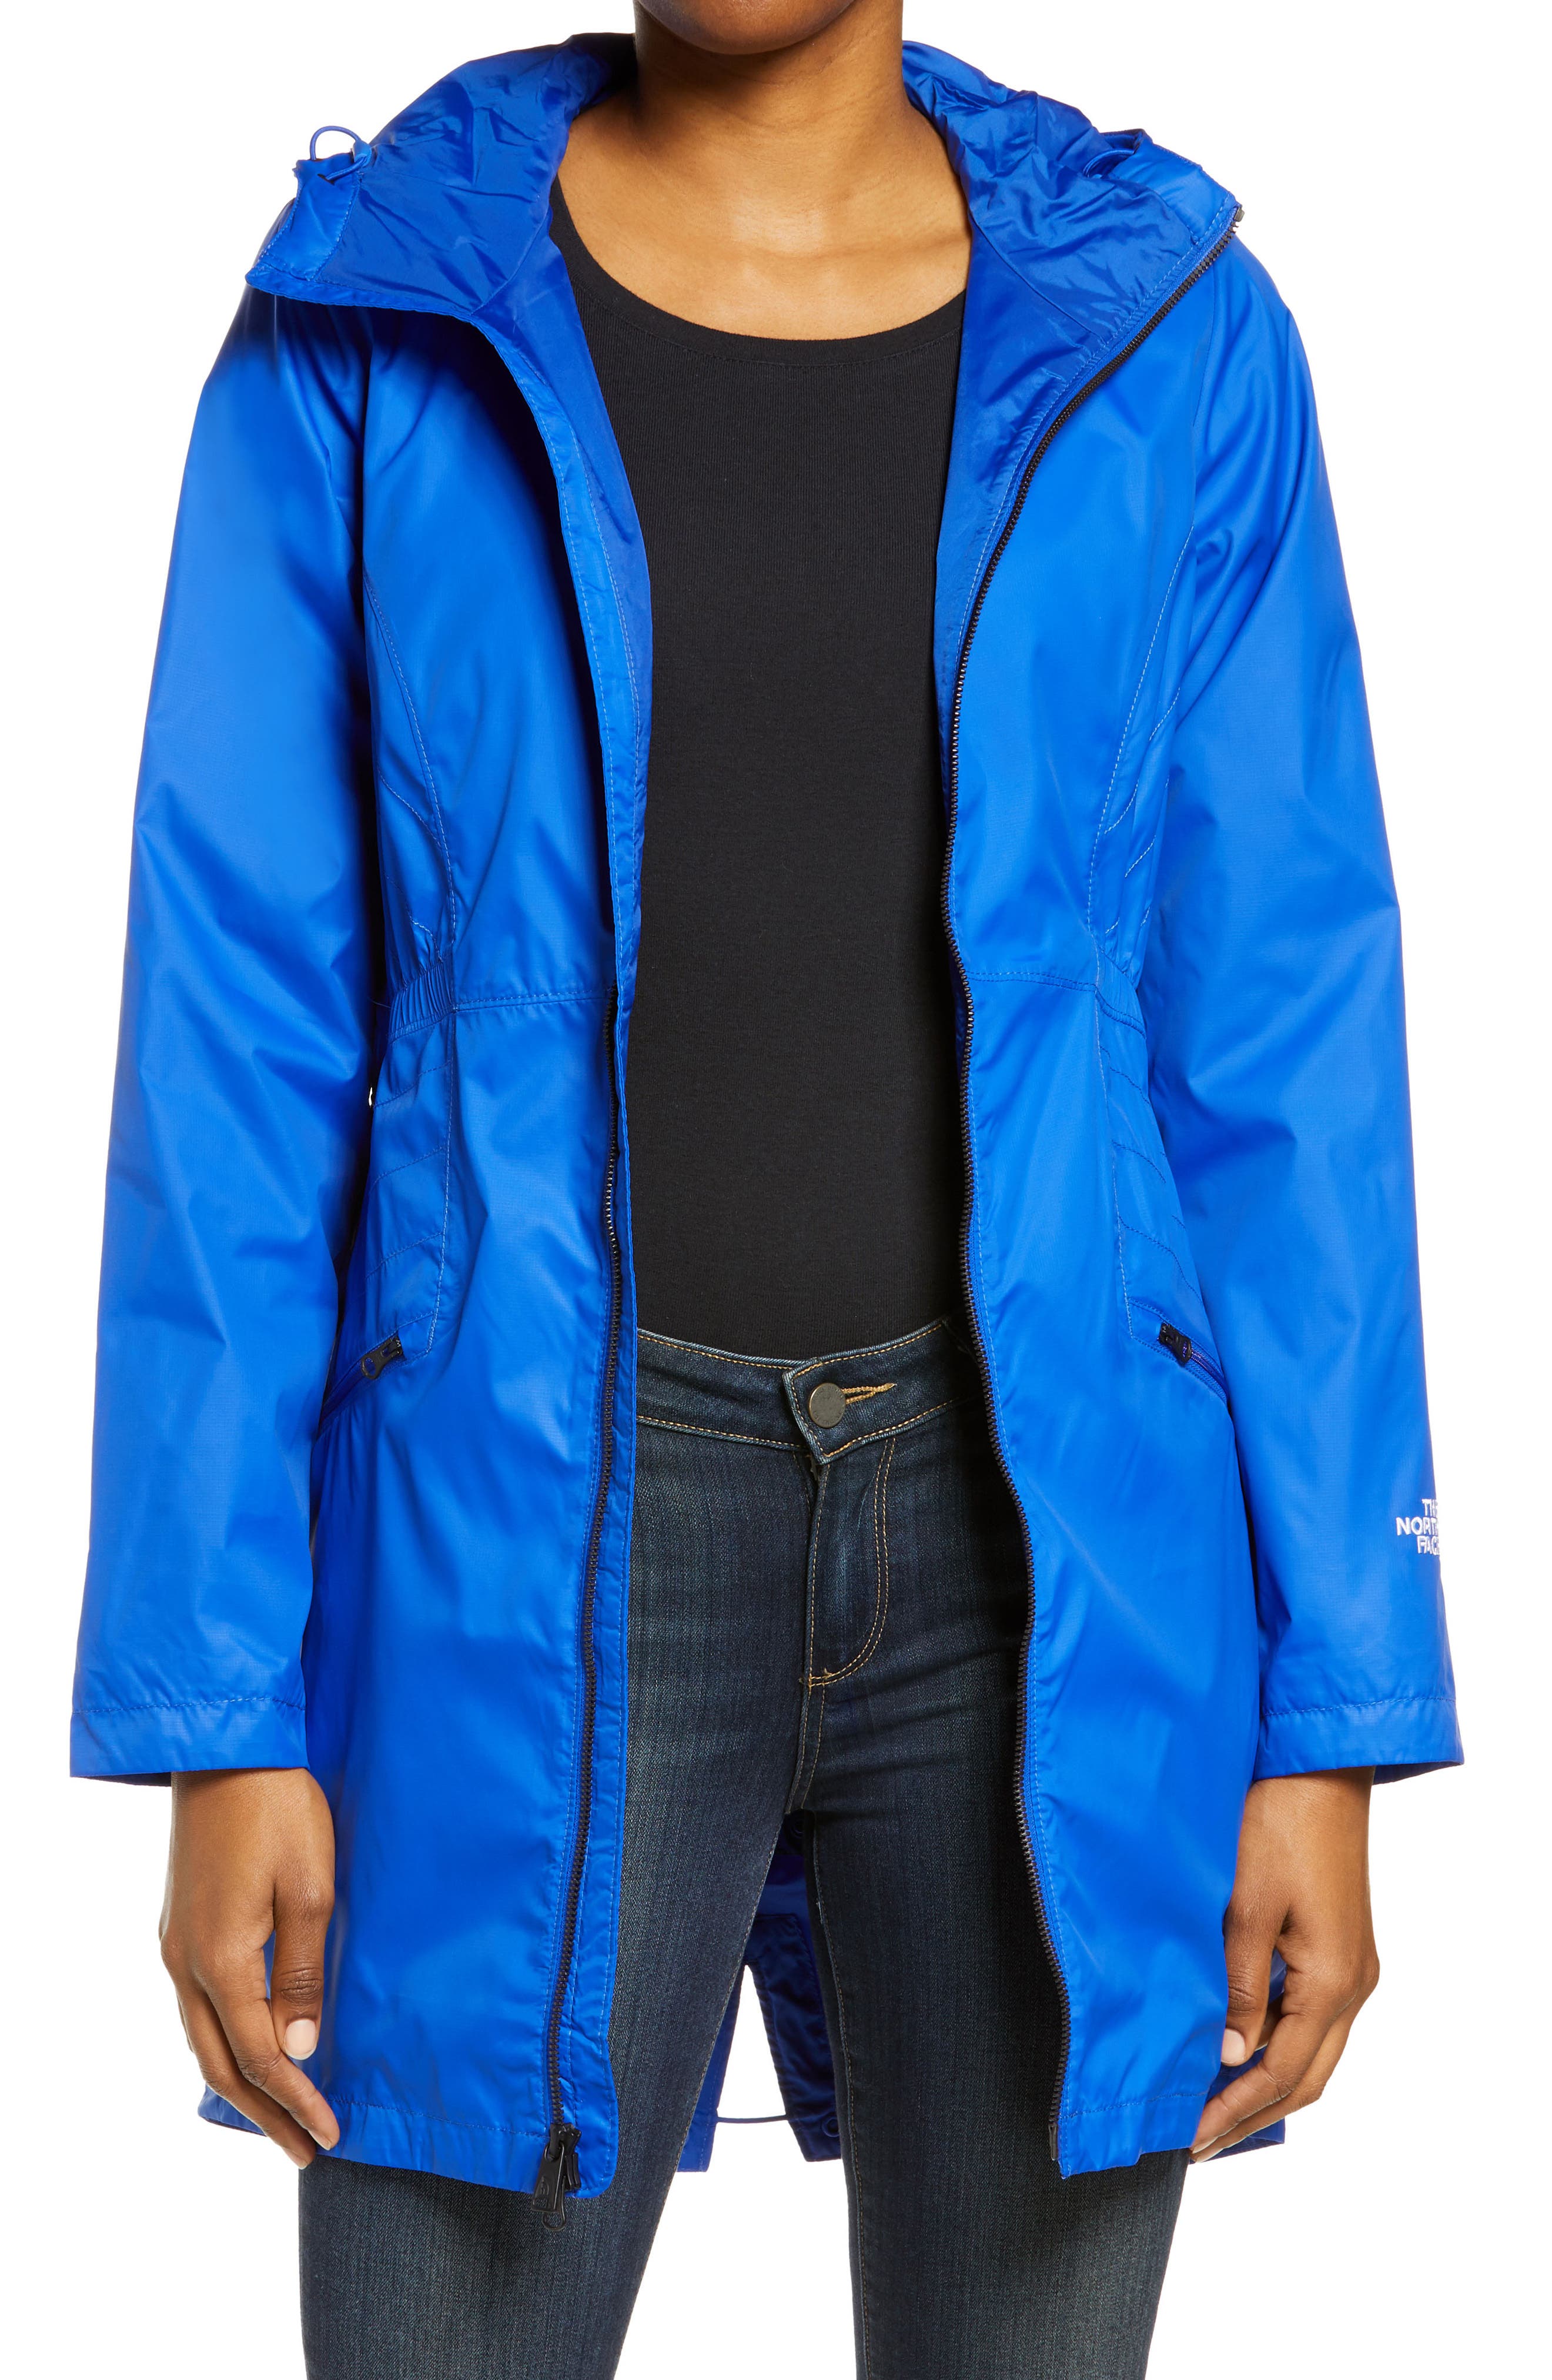 Rissy 2 Hooded Water Repellent Raincoat 